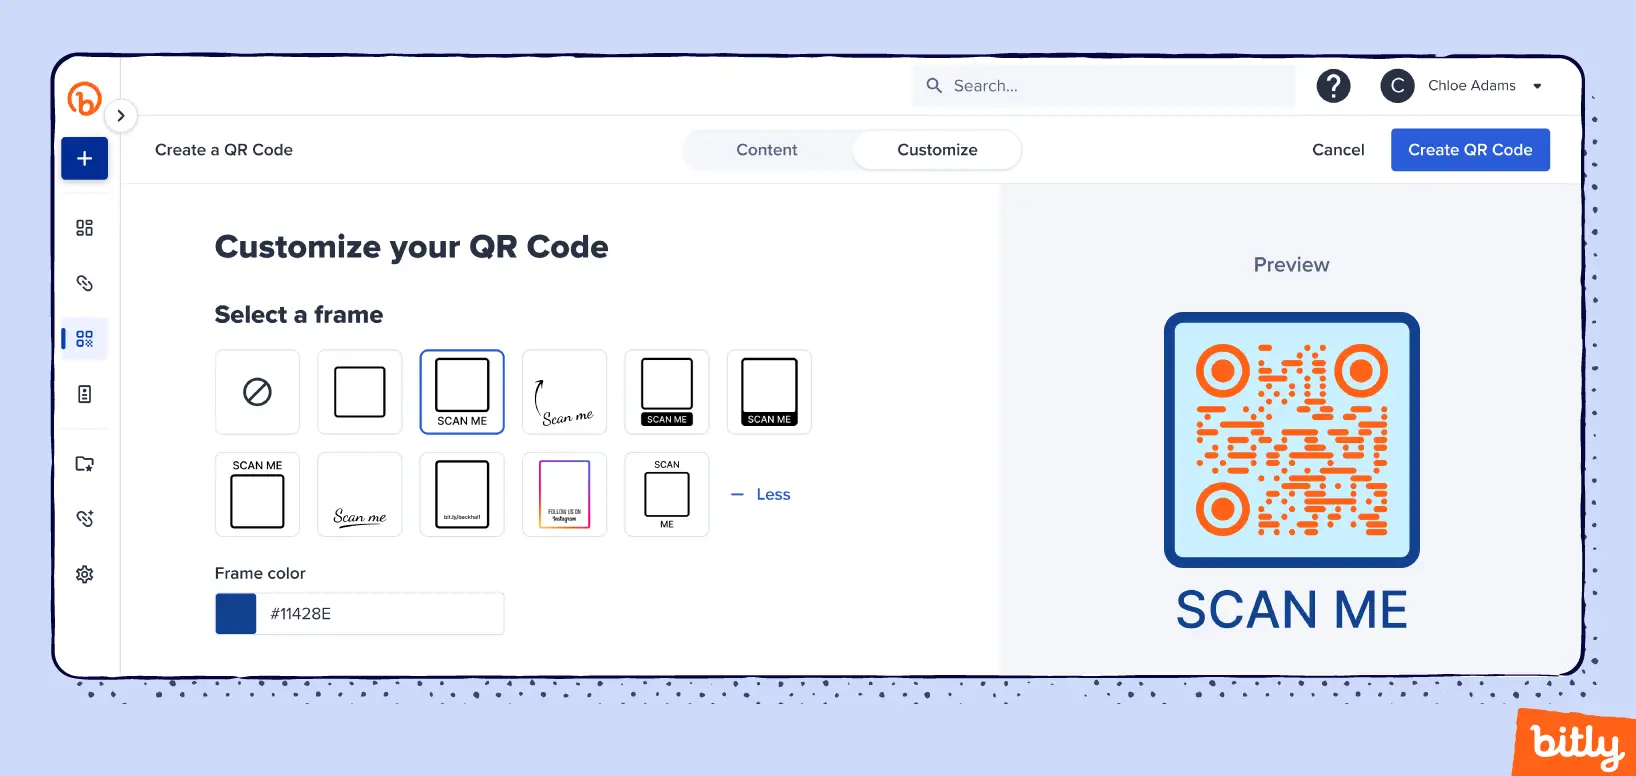 Various frame options for QR Codes in the Bitly Connections Platform.